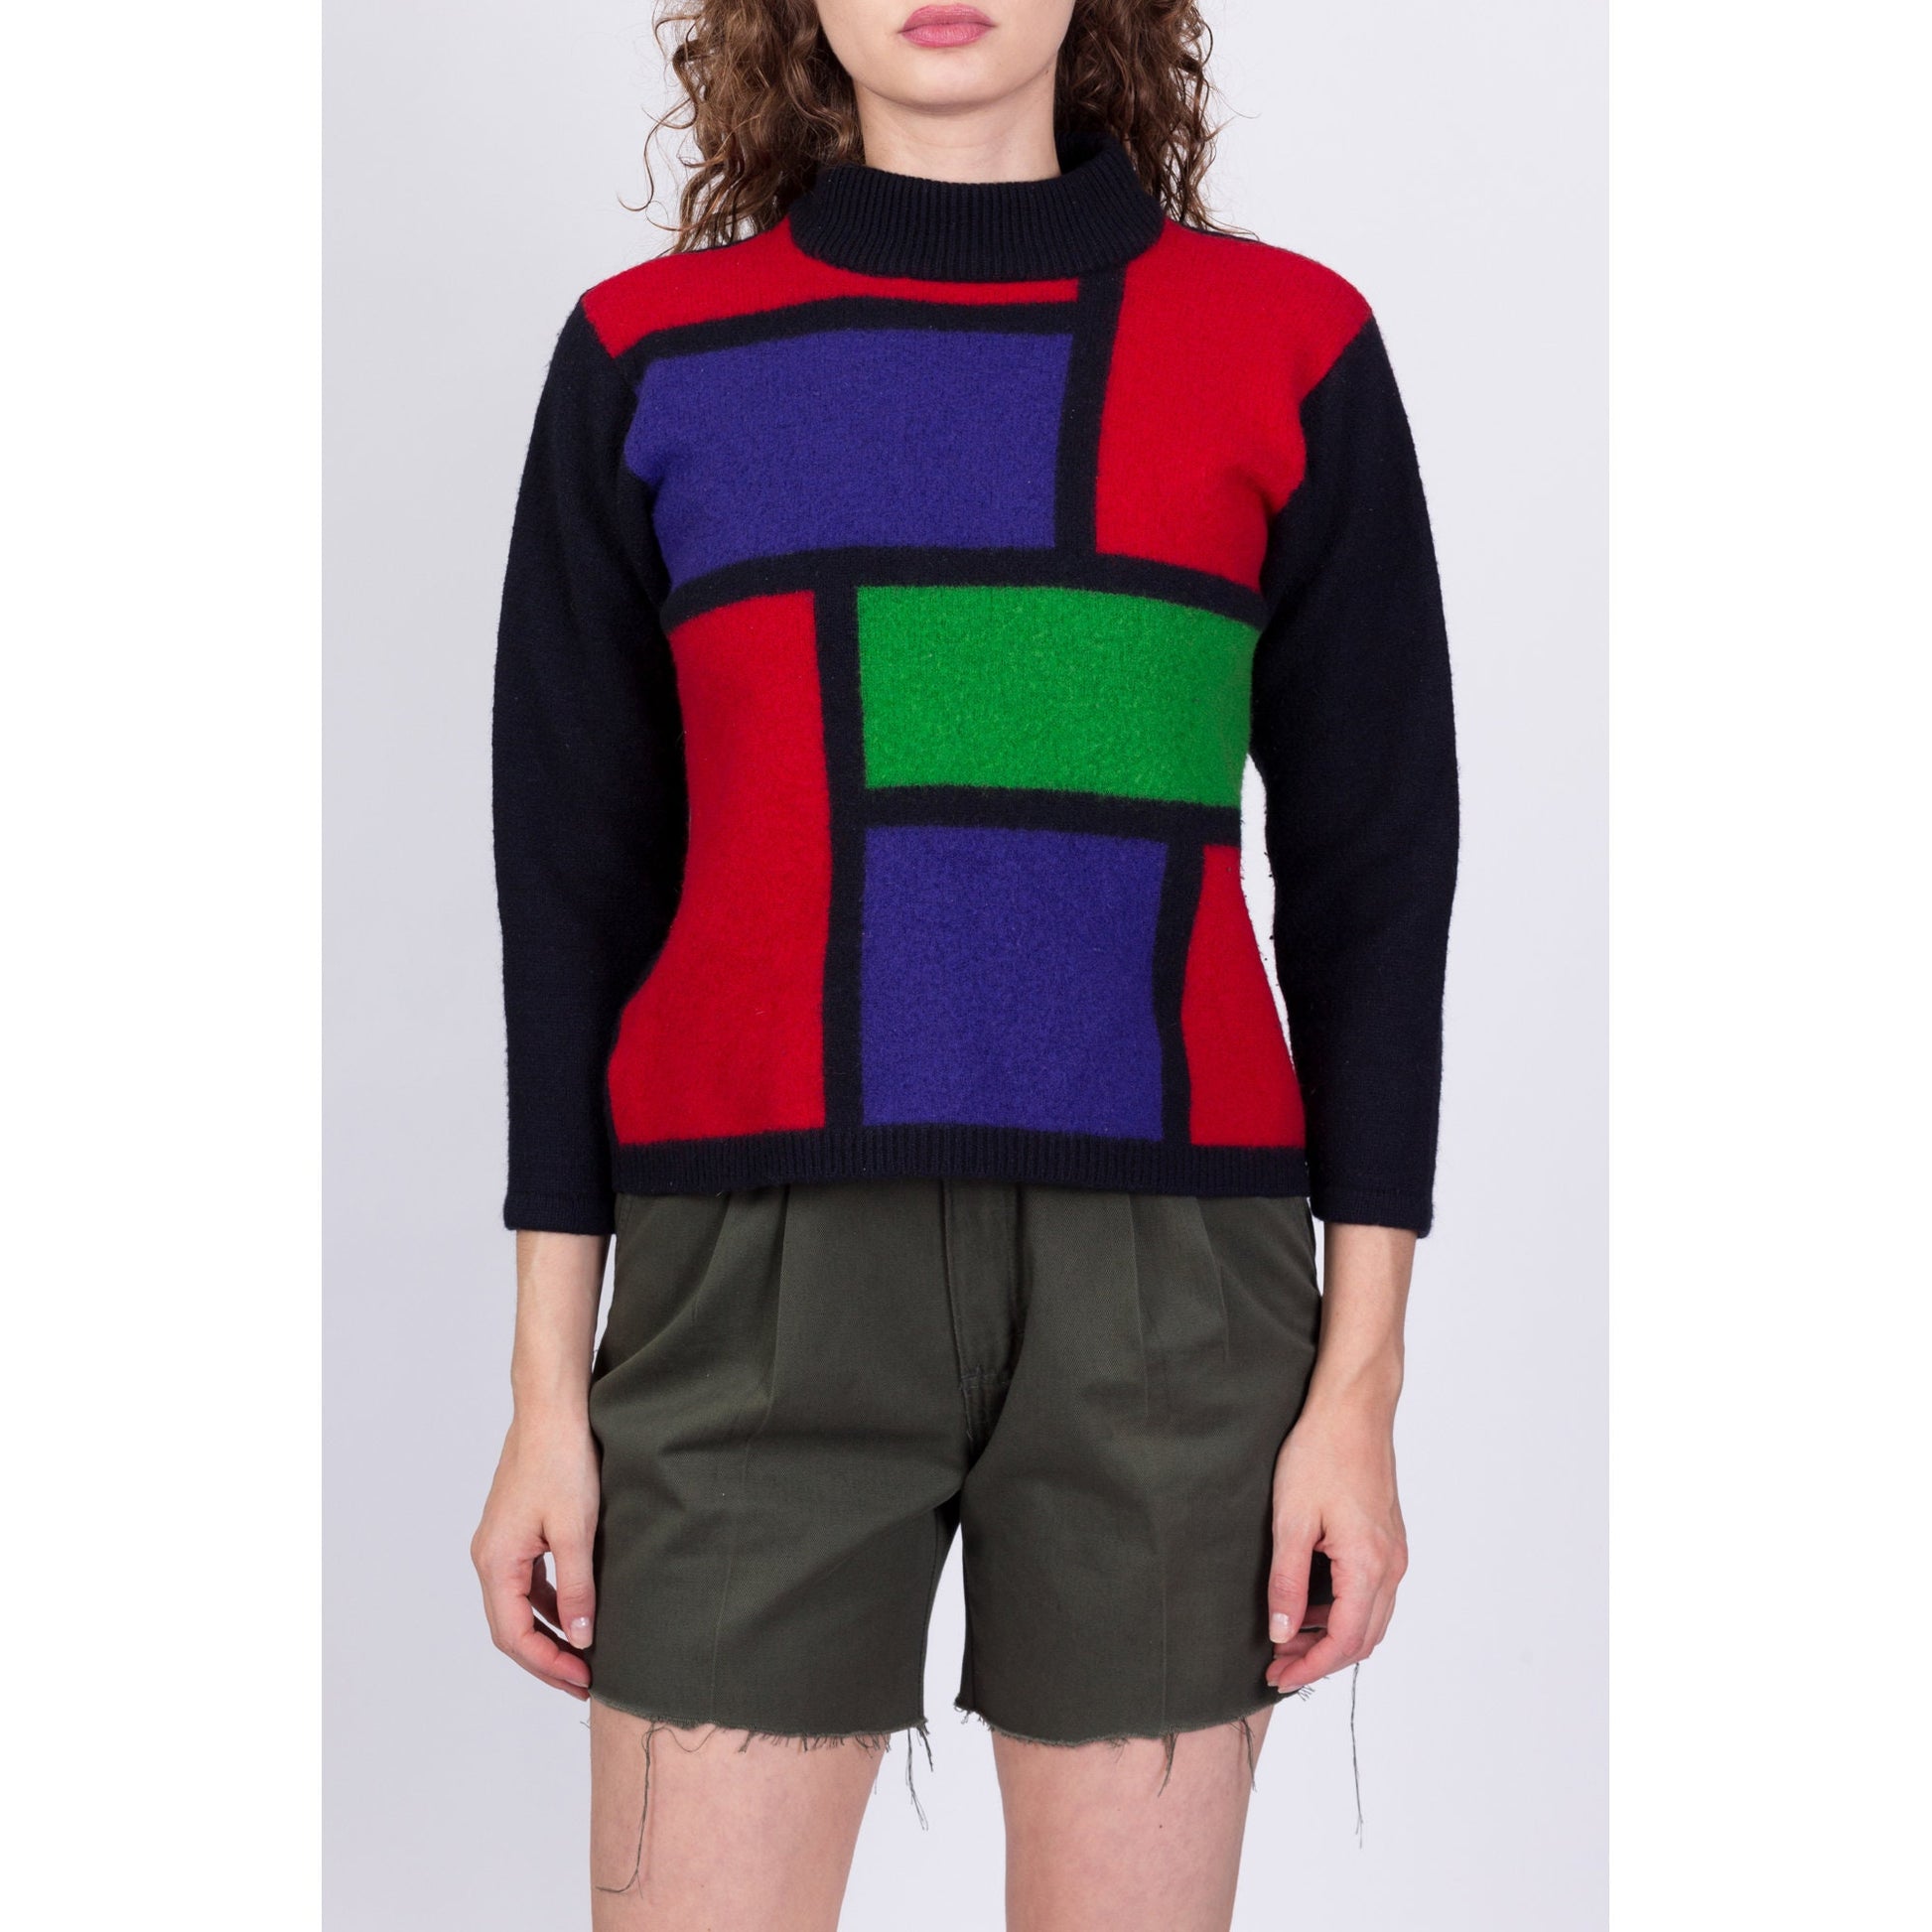 80s Mondrian Lambswool Knit Cropped Sweater - Petite Small 